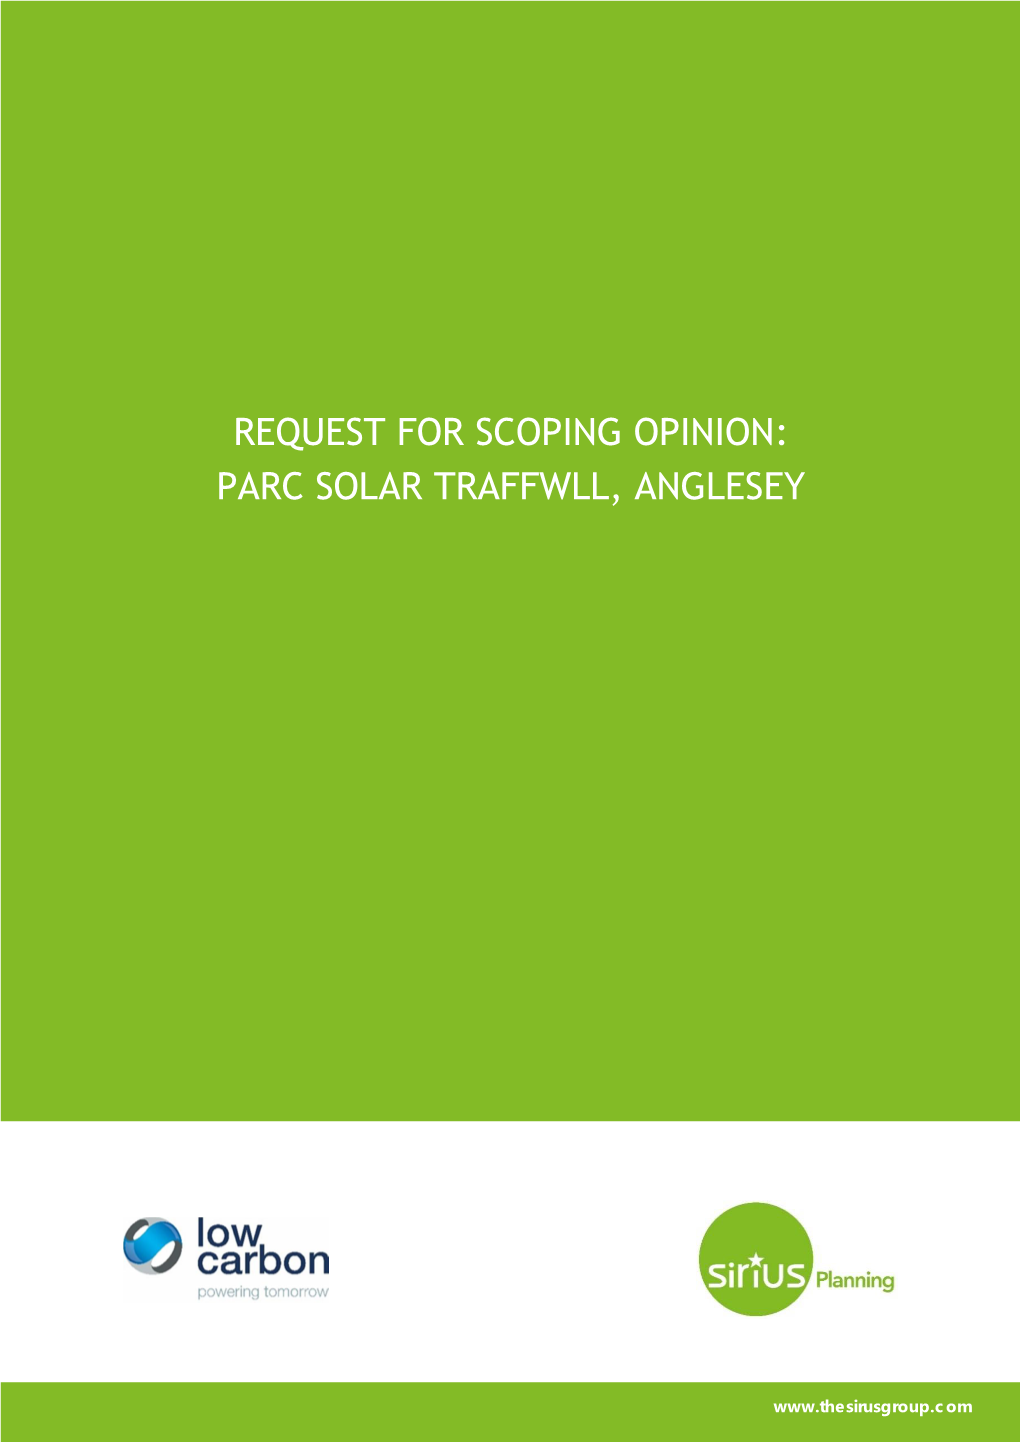 Request for a Scoping Opinion Proposed Pv Solar Farm and Power Storage Units